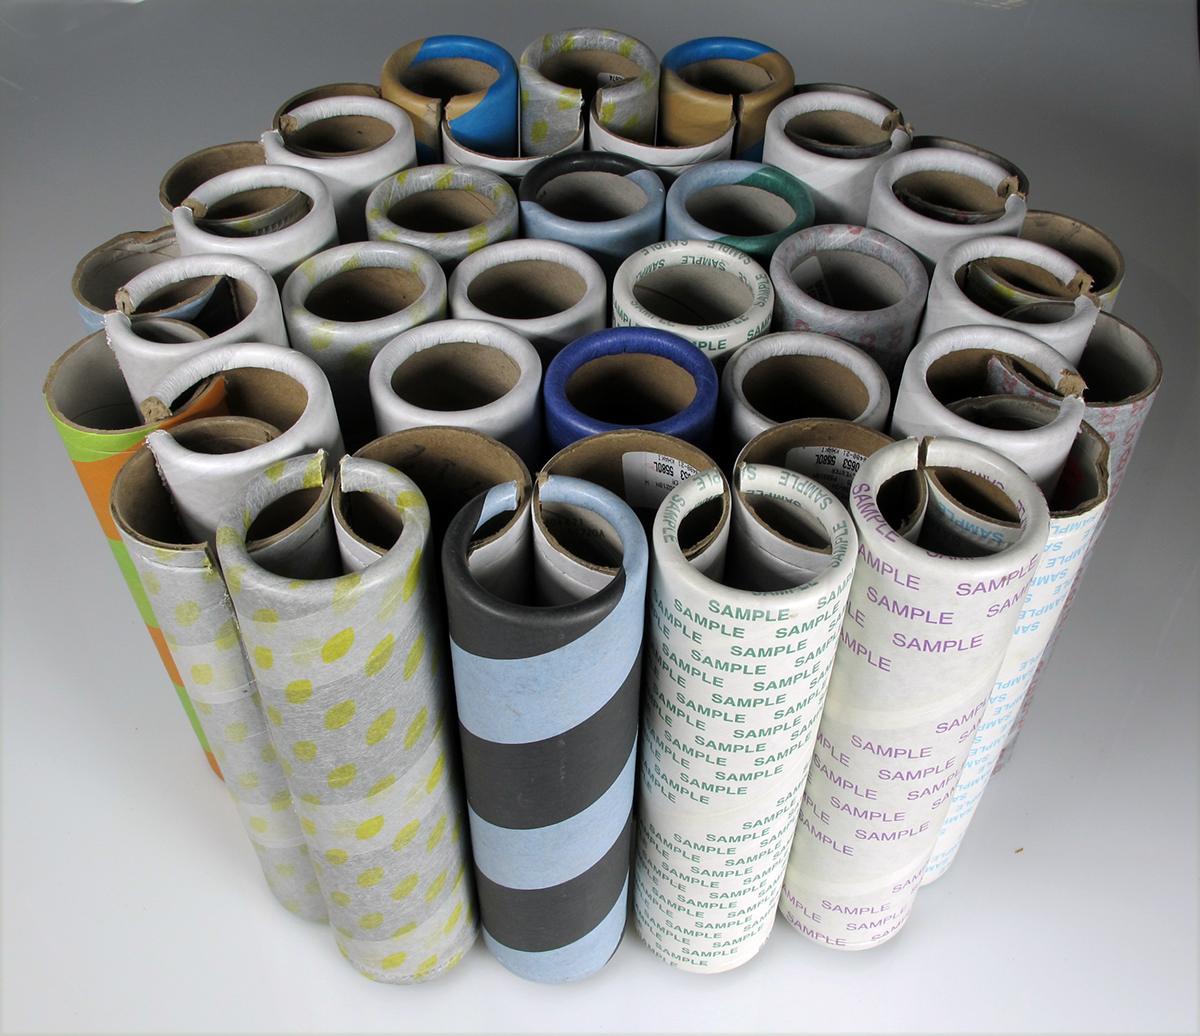 RECYCLED furniture sitting stool chair paper tube paper recycled furniture reuse Material ReUse design